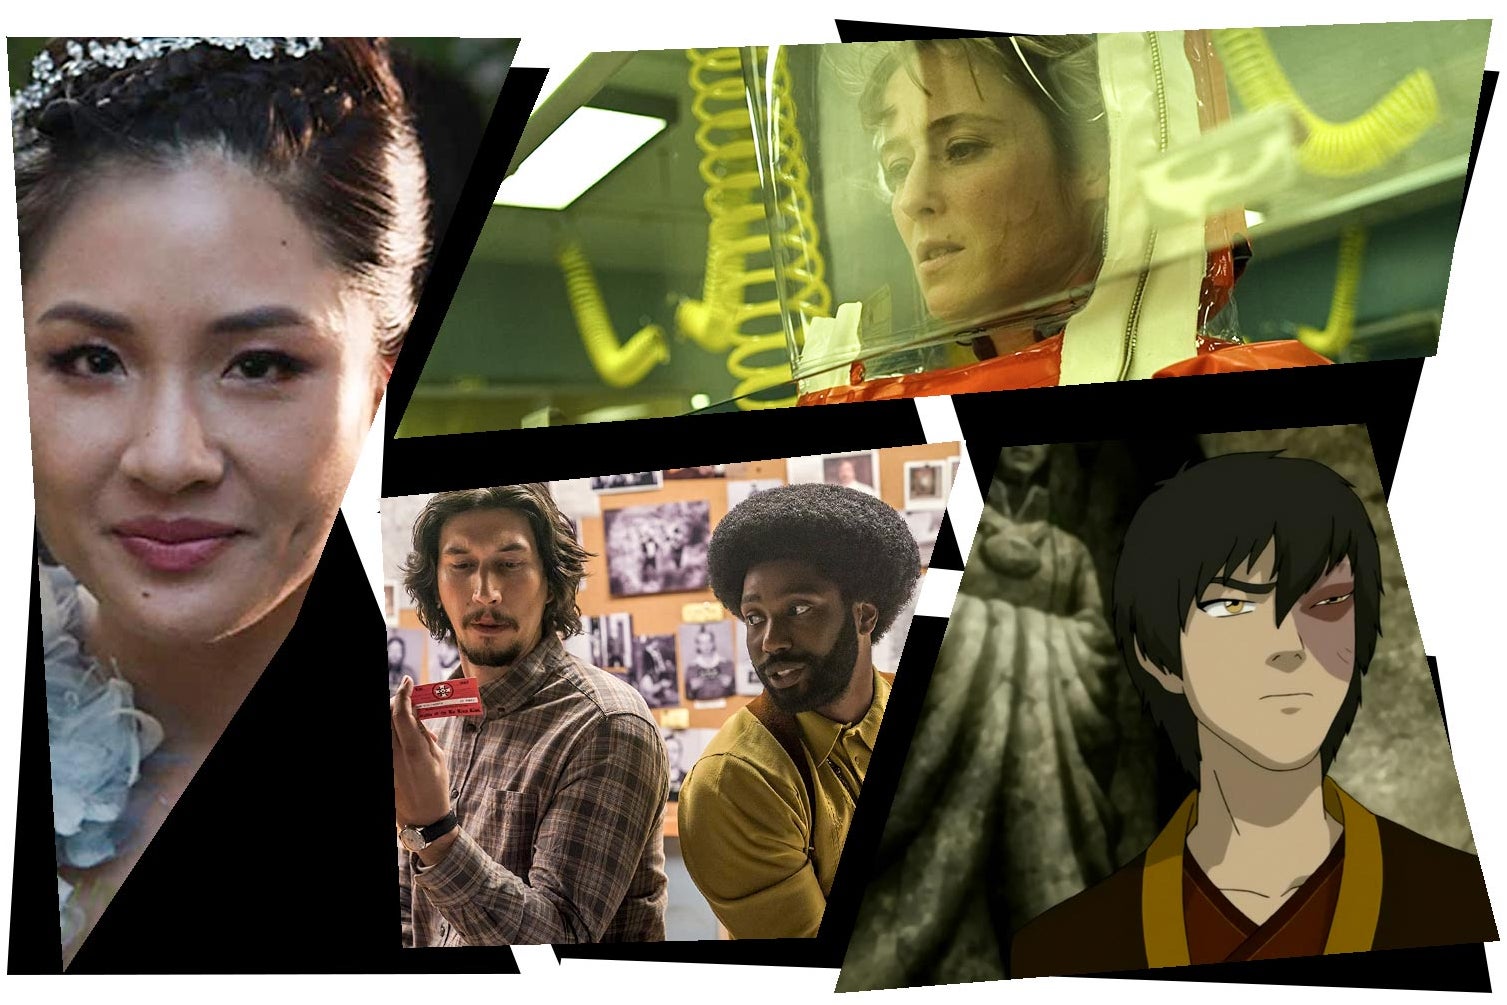 Stills from the movies in a mosaic-style collage.